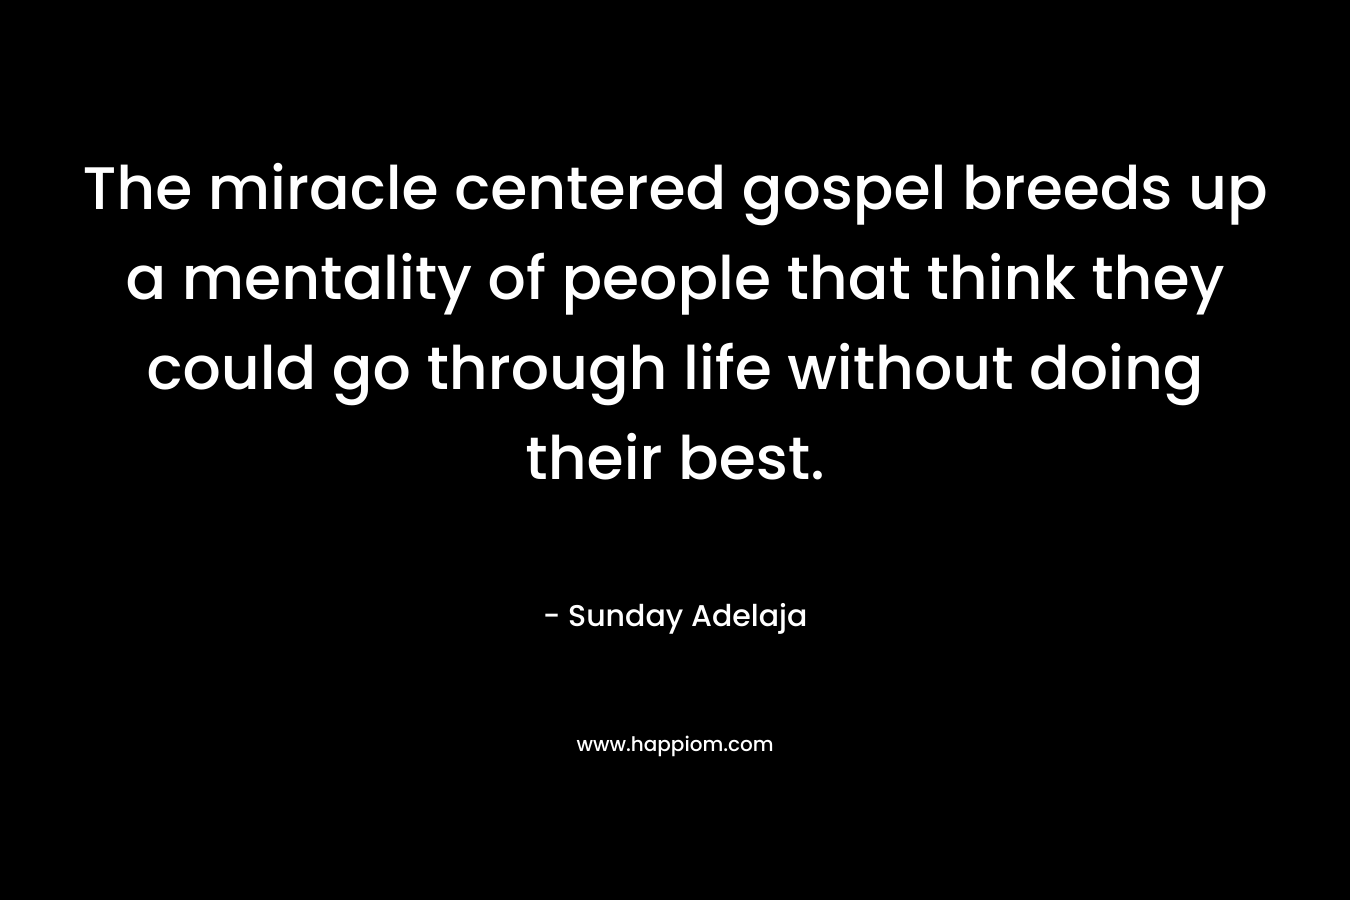 The miracle centered gospel breeds up a mentality of people that think they could go through life without doing their best.